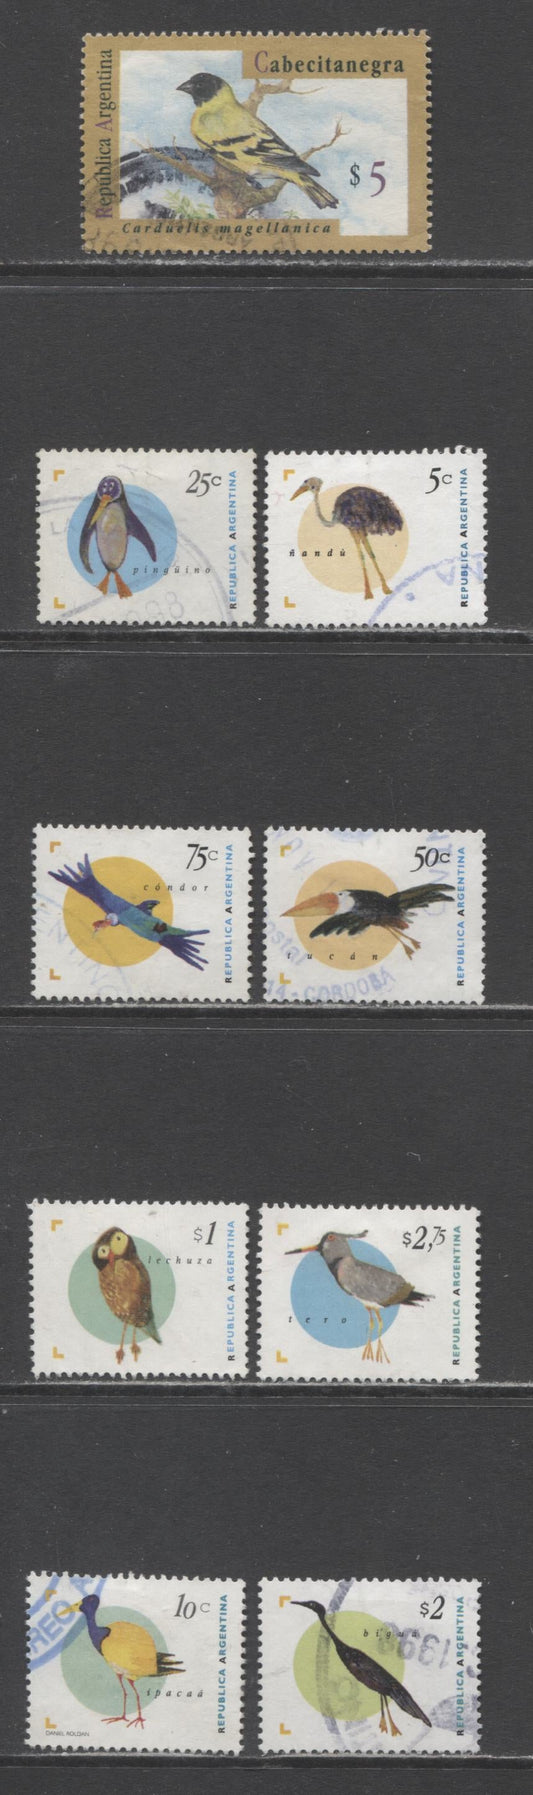 Lot 38 Argentina SC#1876/1958 1995 Carduelis Magellanica - Birds Definitives, 9 Very Fine Used Singles, Click on Listing to See ALL Pictures, 2017 Scott Cat. $17.6